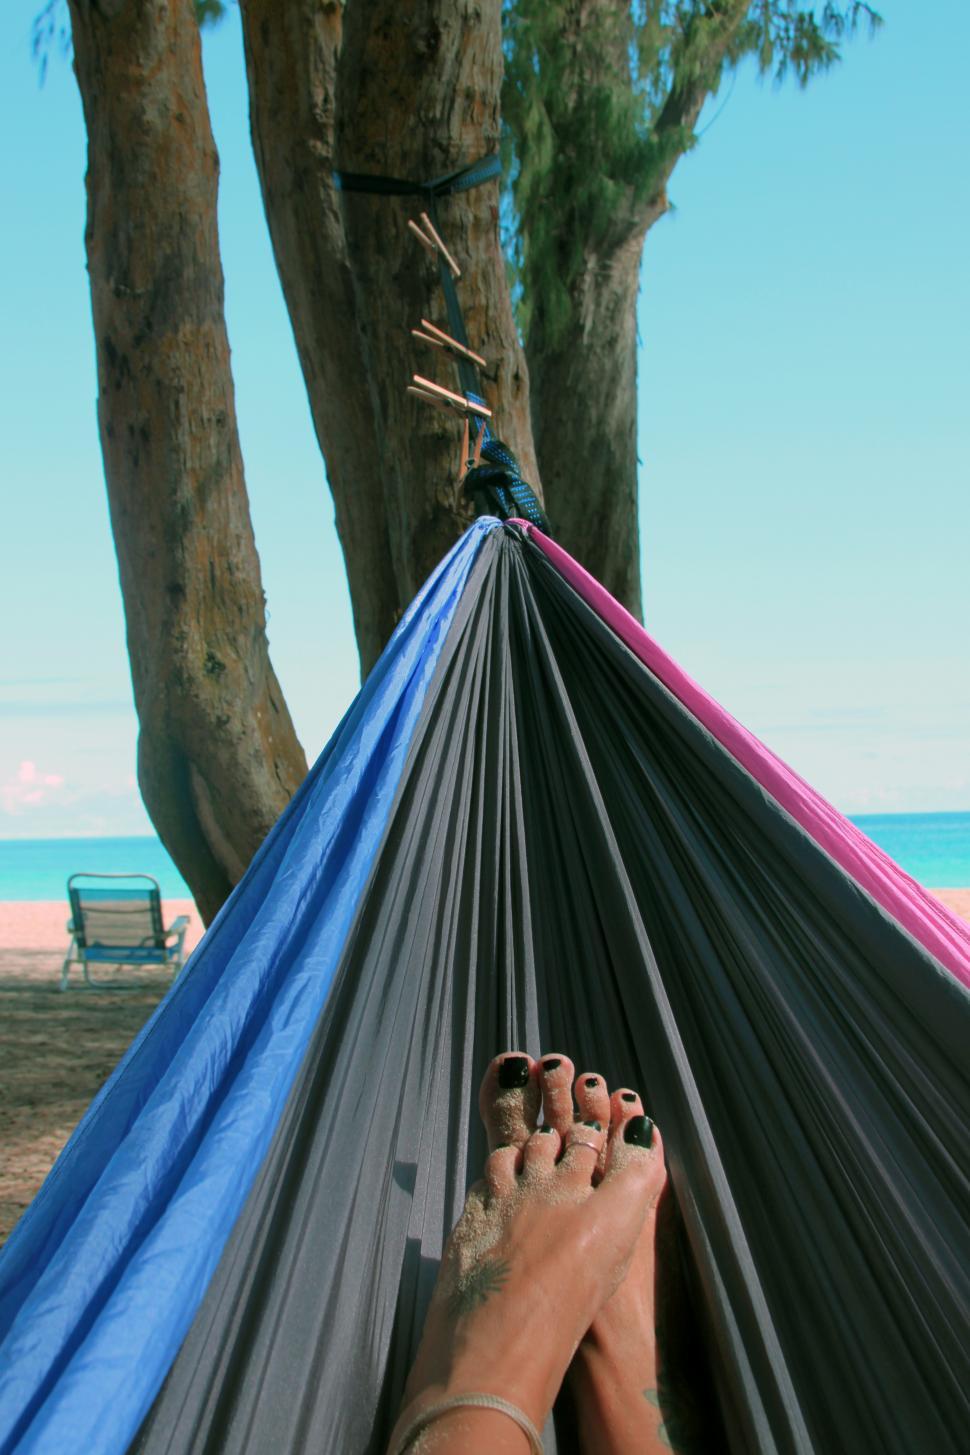 Free Image of A person s feet in a hammock on a beach 